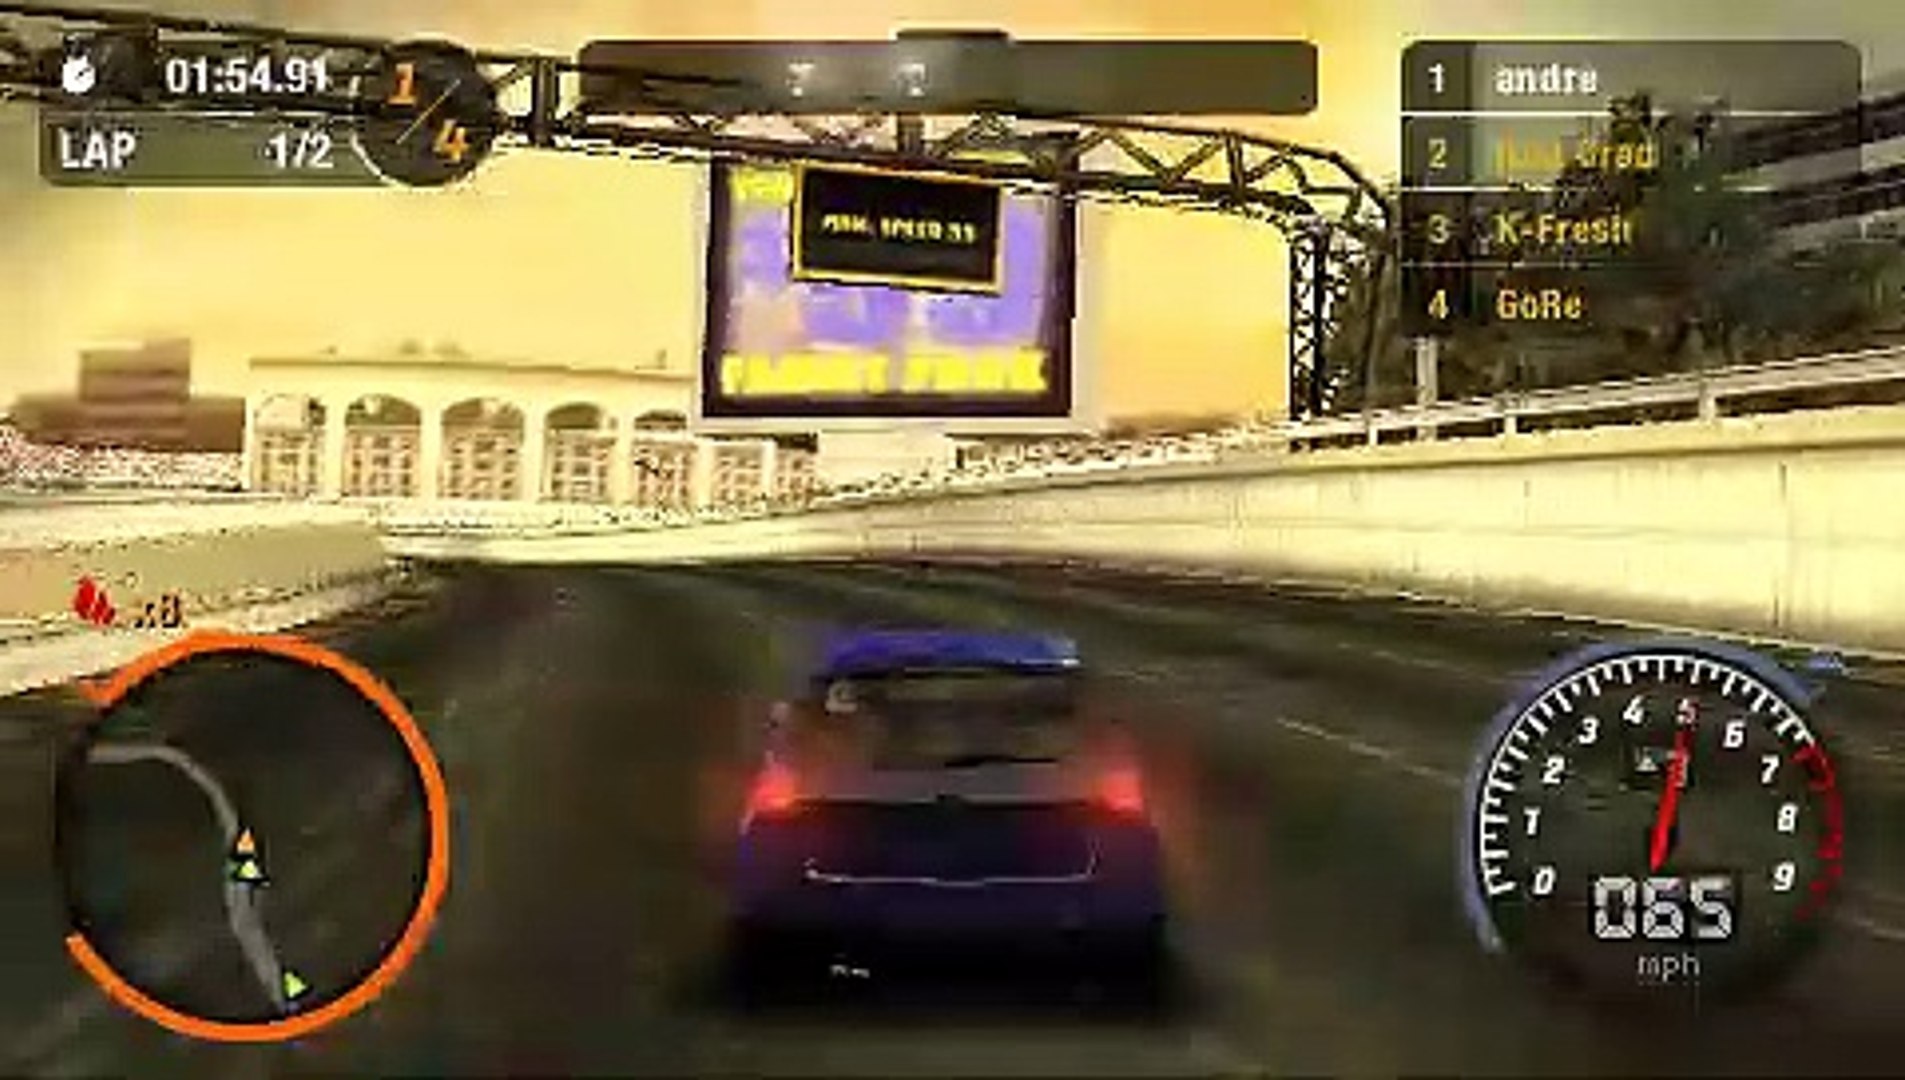 Need for Speed: Most Wanted 5-1-0 - PSP